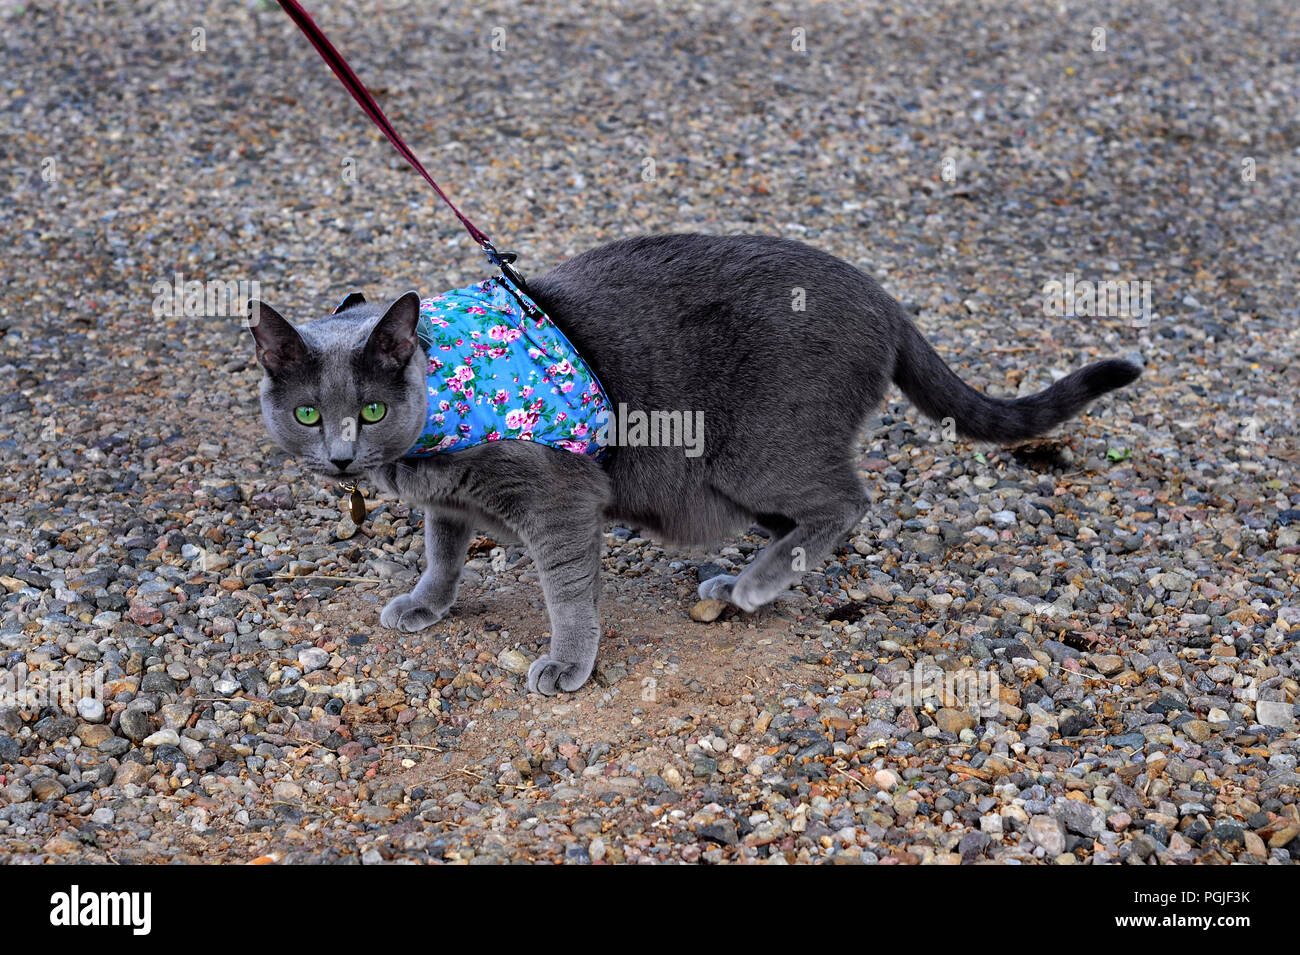 A Russian Blue cat on a leash wearing a cat harness is walked by its owner. Stock Photo